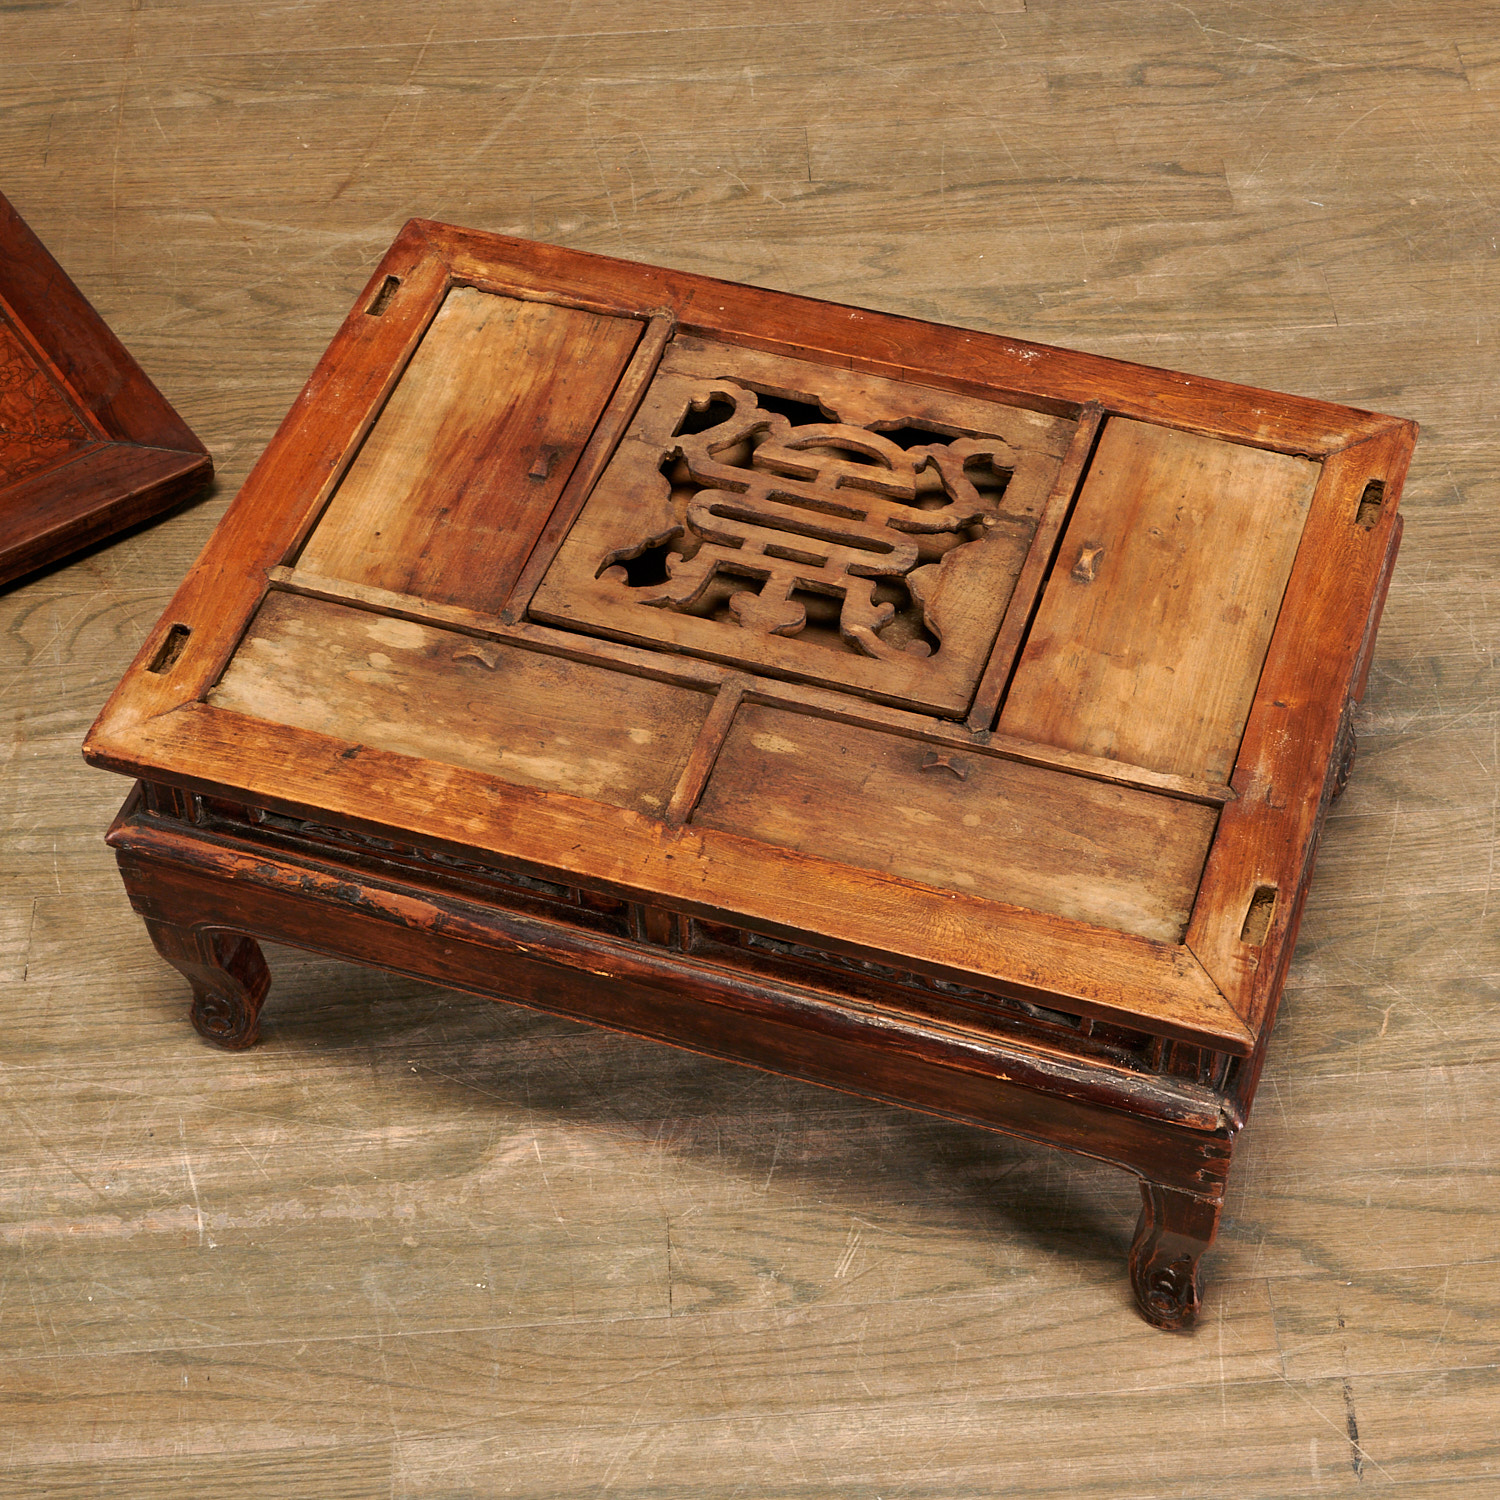 Unusual Chinese hardwood traveling scholar's table - Image 4 of 8